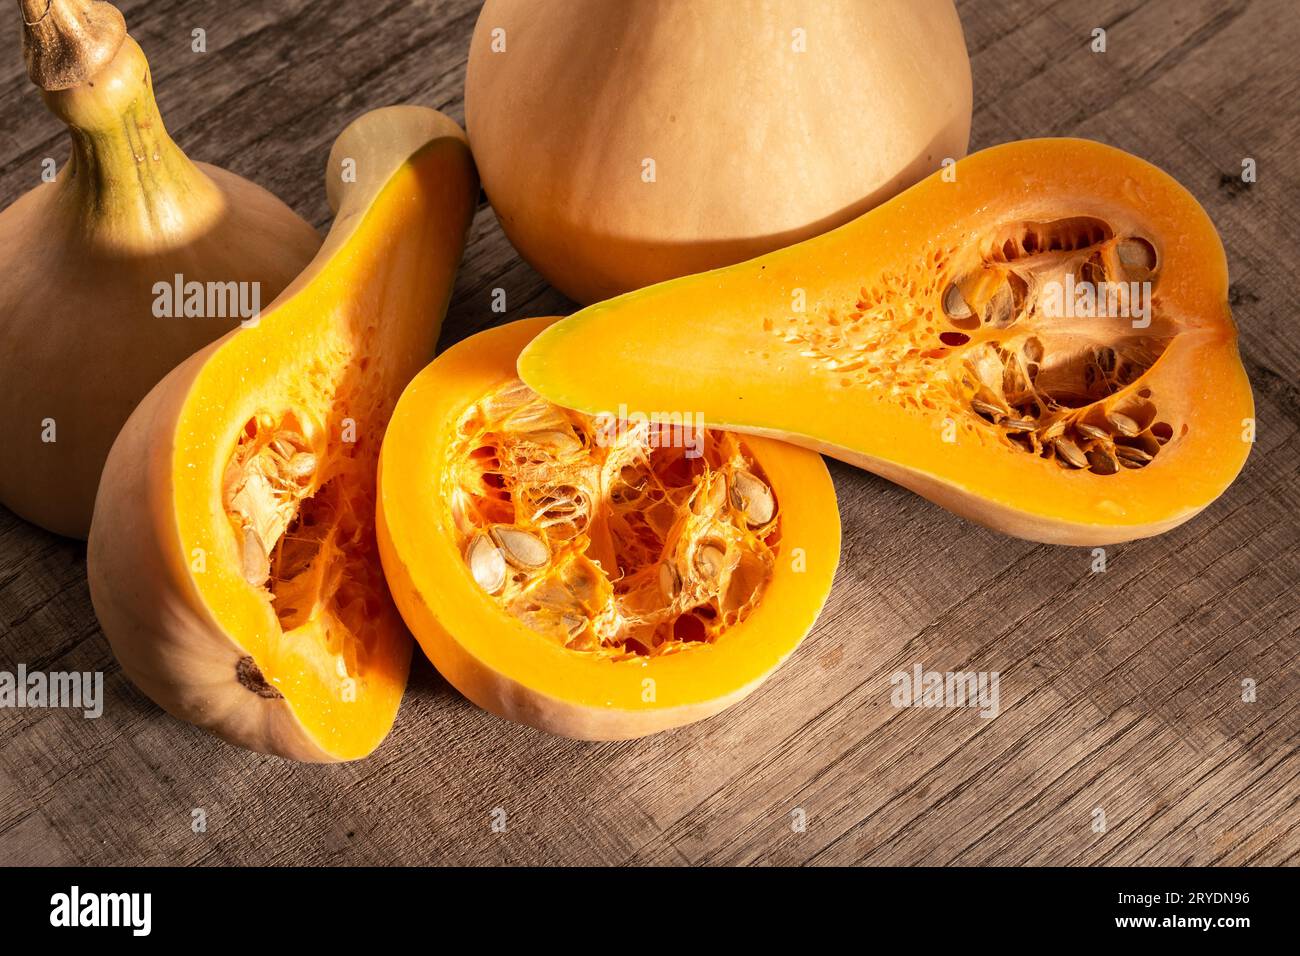 Fresh butternut squash on rustic wooden table Stock Photo